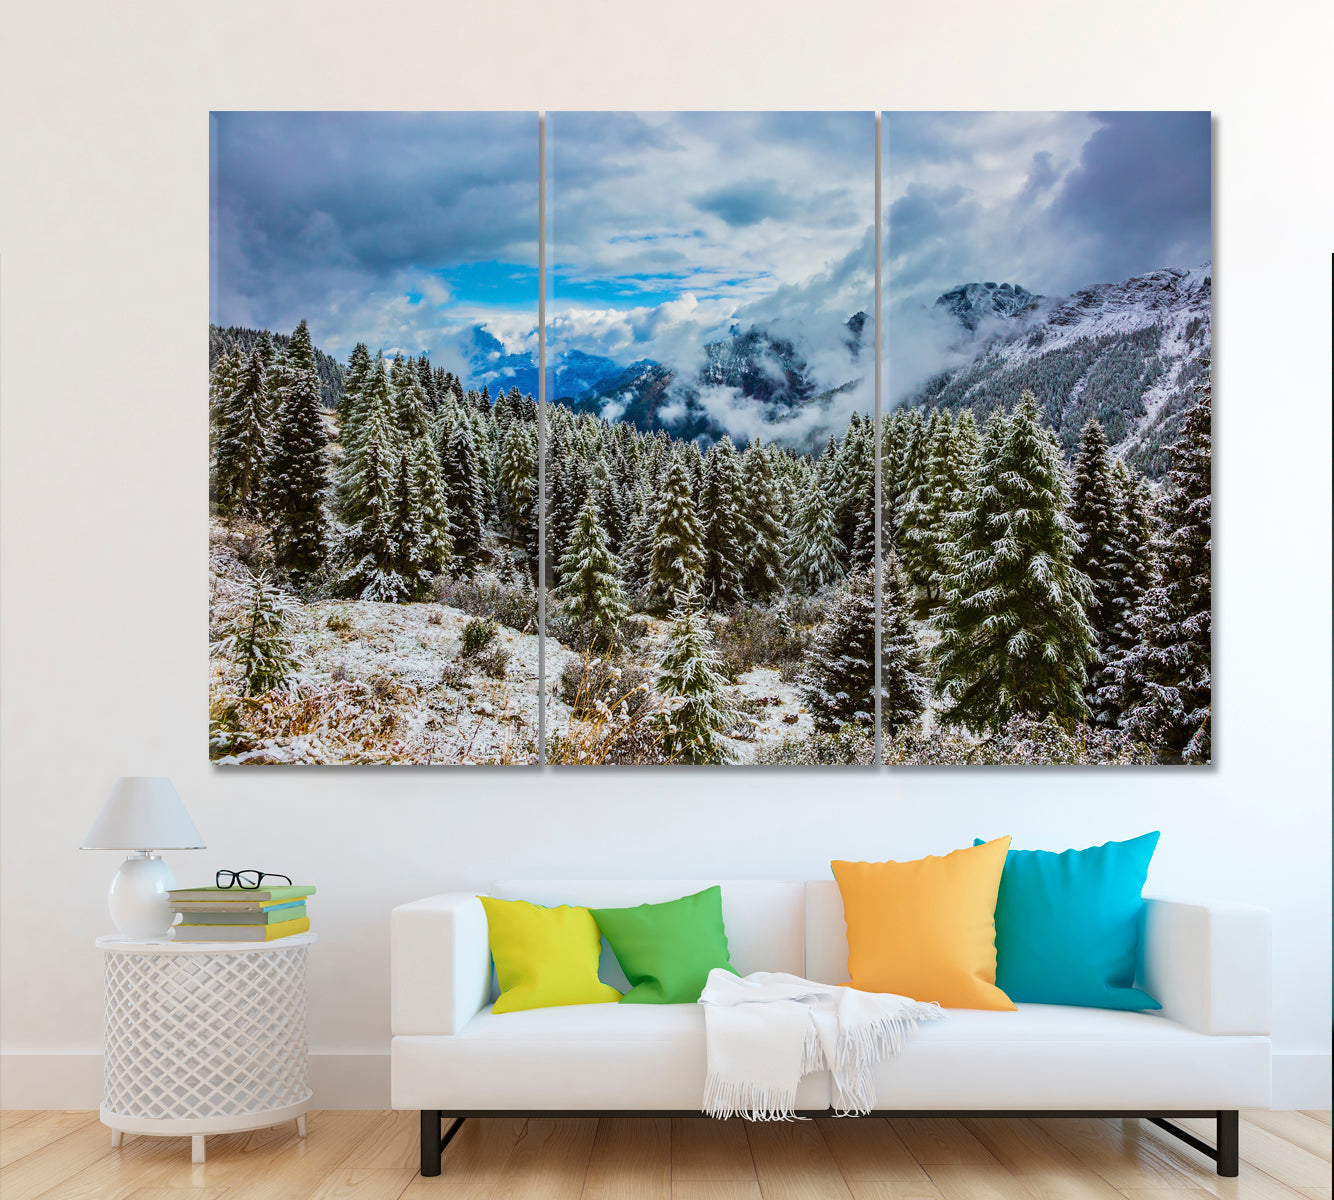 Evergreen Forests in Snowy Alps Canvas Print ArtLexy 3 Panels 36"x24" inches 